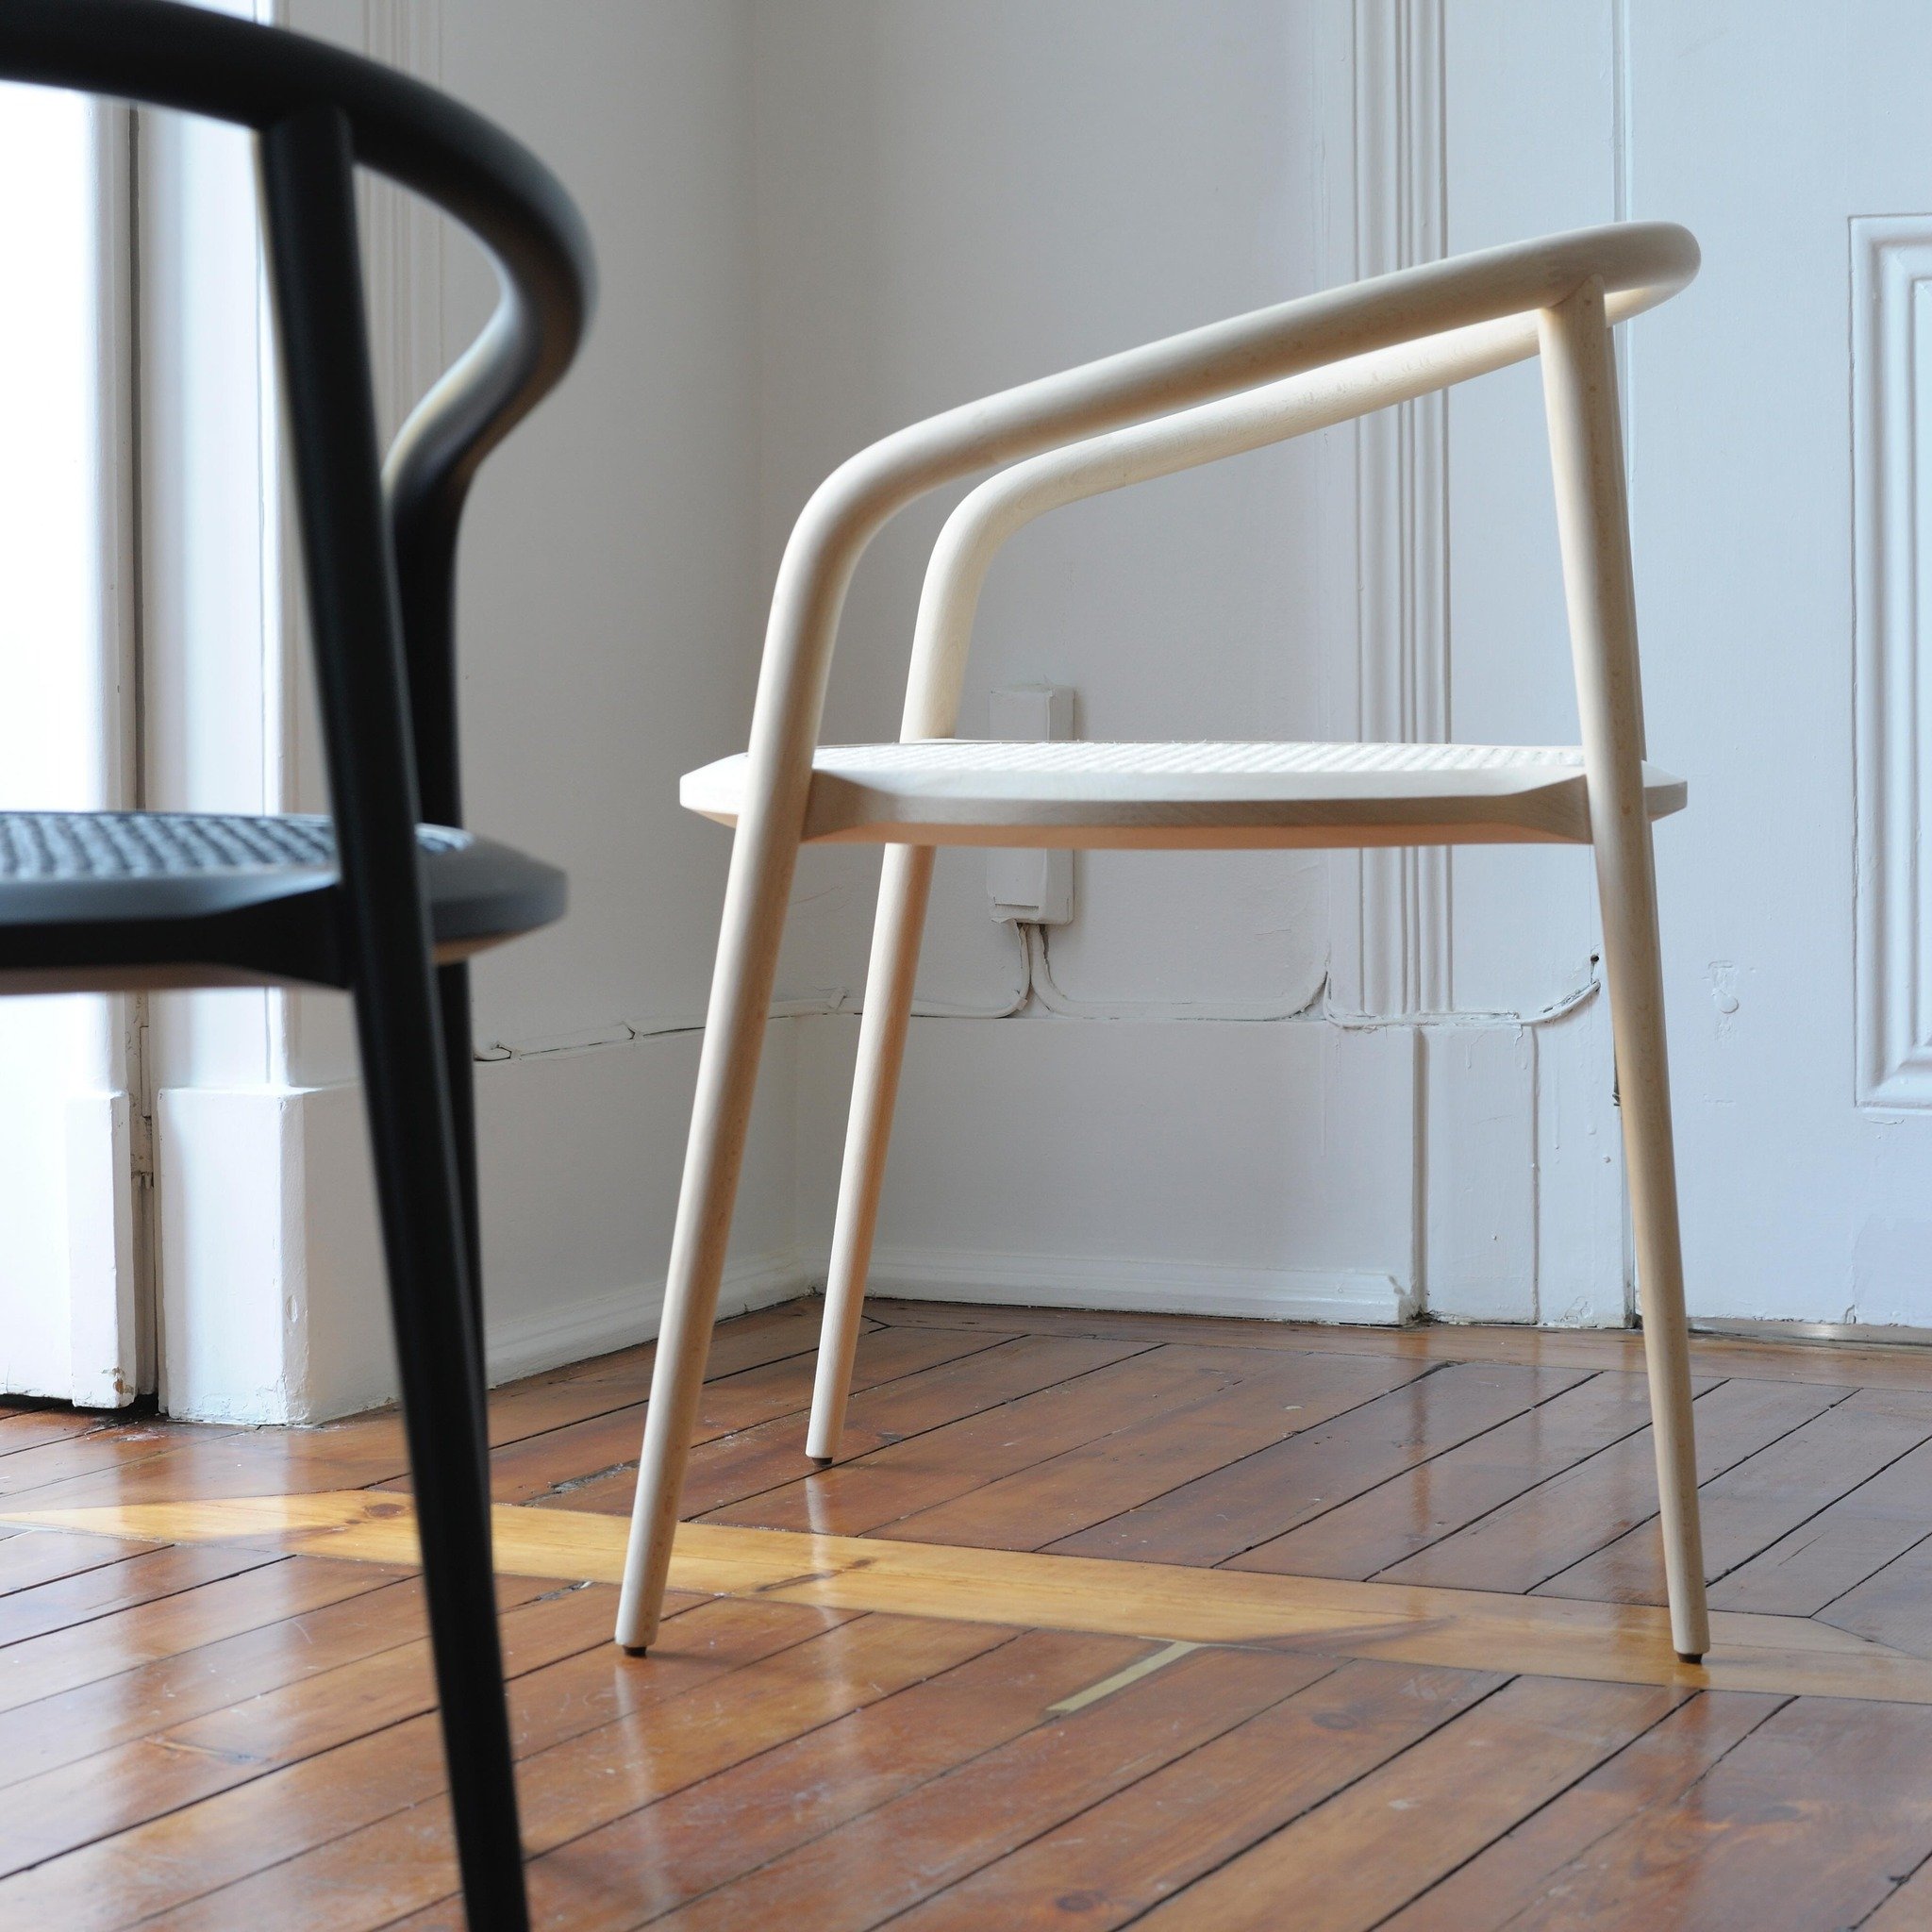 Don&rsquo;t stop the dance! Aranha Chair by @marco_sousasantos